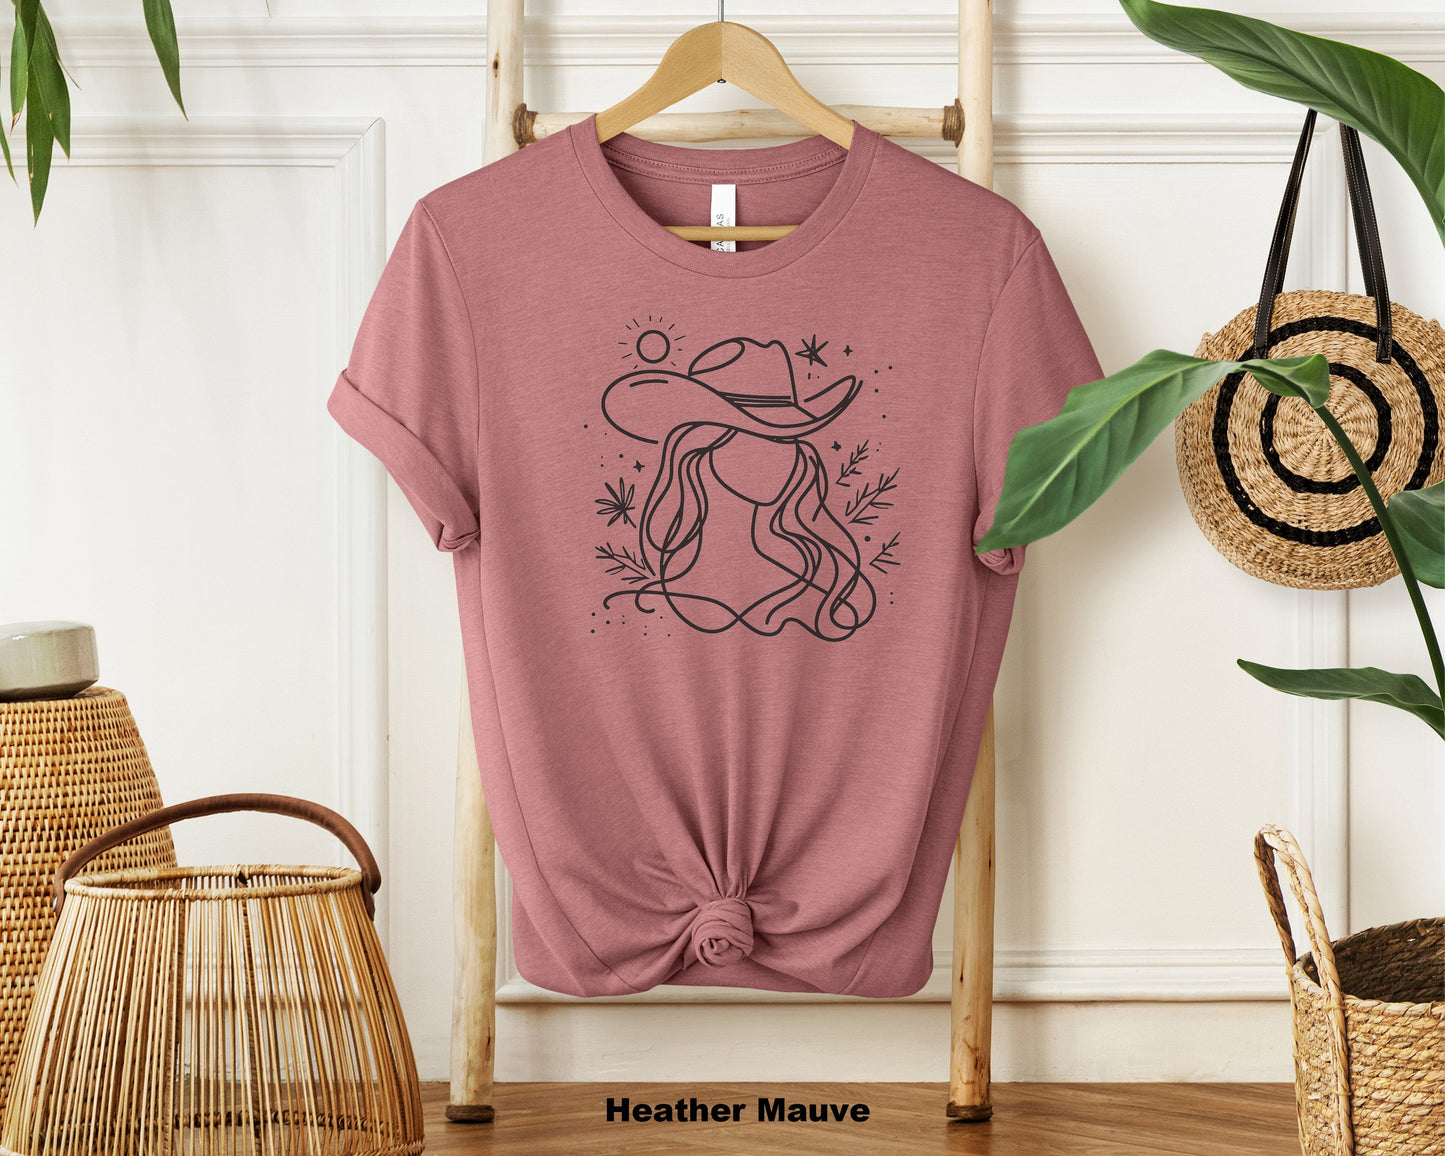 Coastal Cowgirl Crewneck Tee - Ride the Waves in Style!